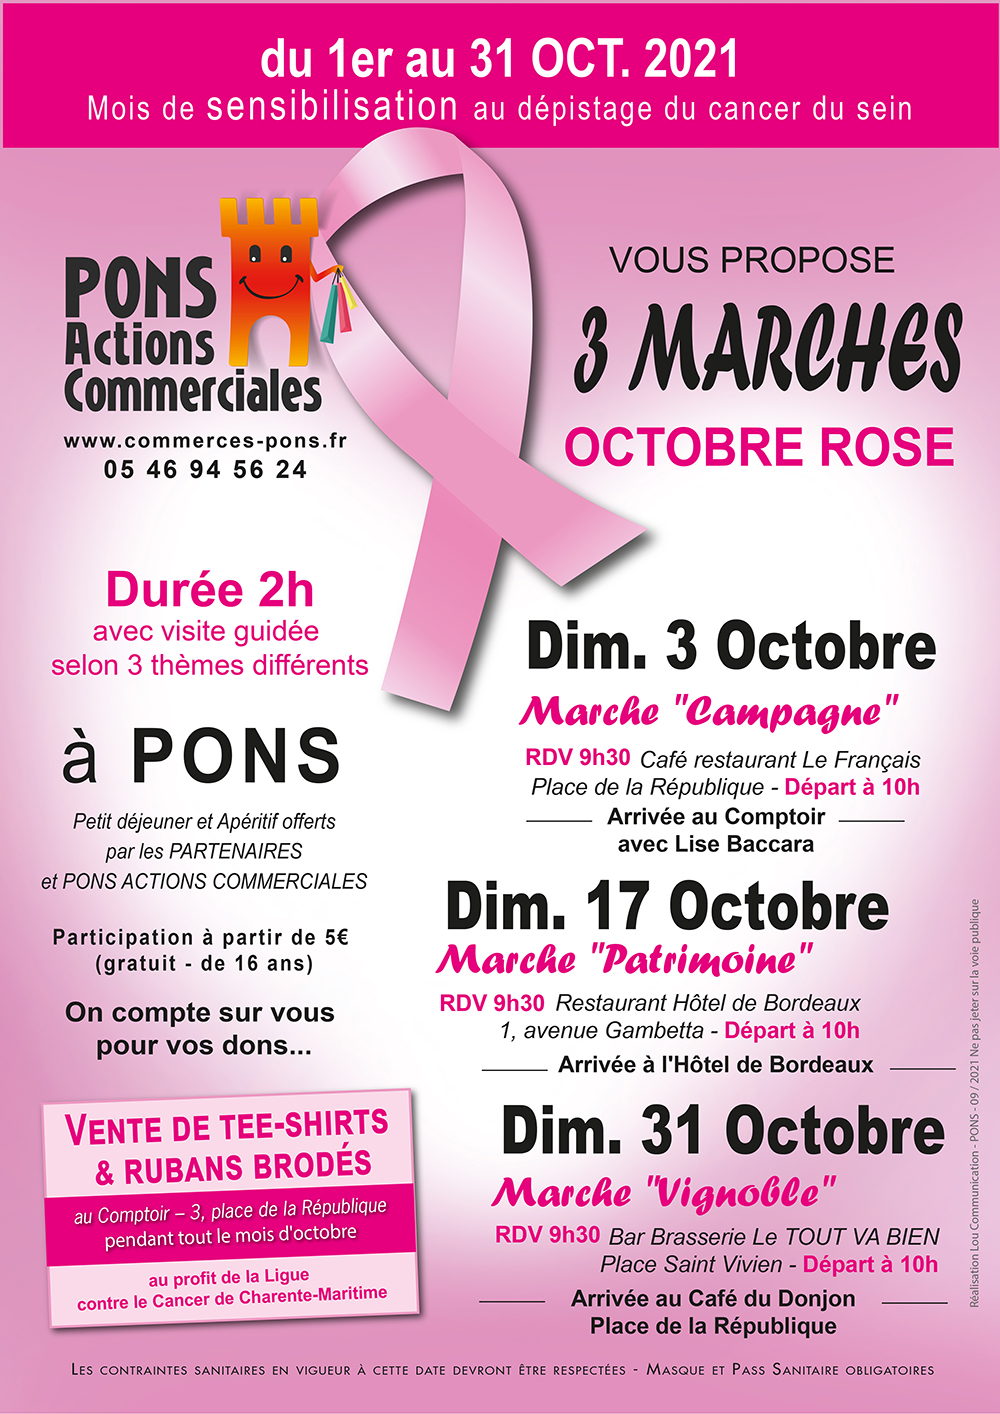 Octobre rose 2021 - Pons Actions Commerciales